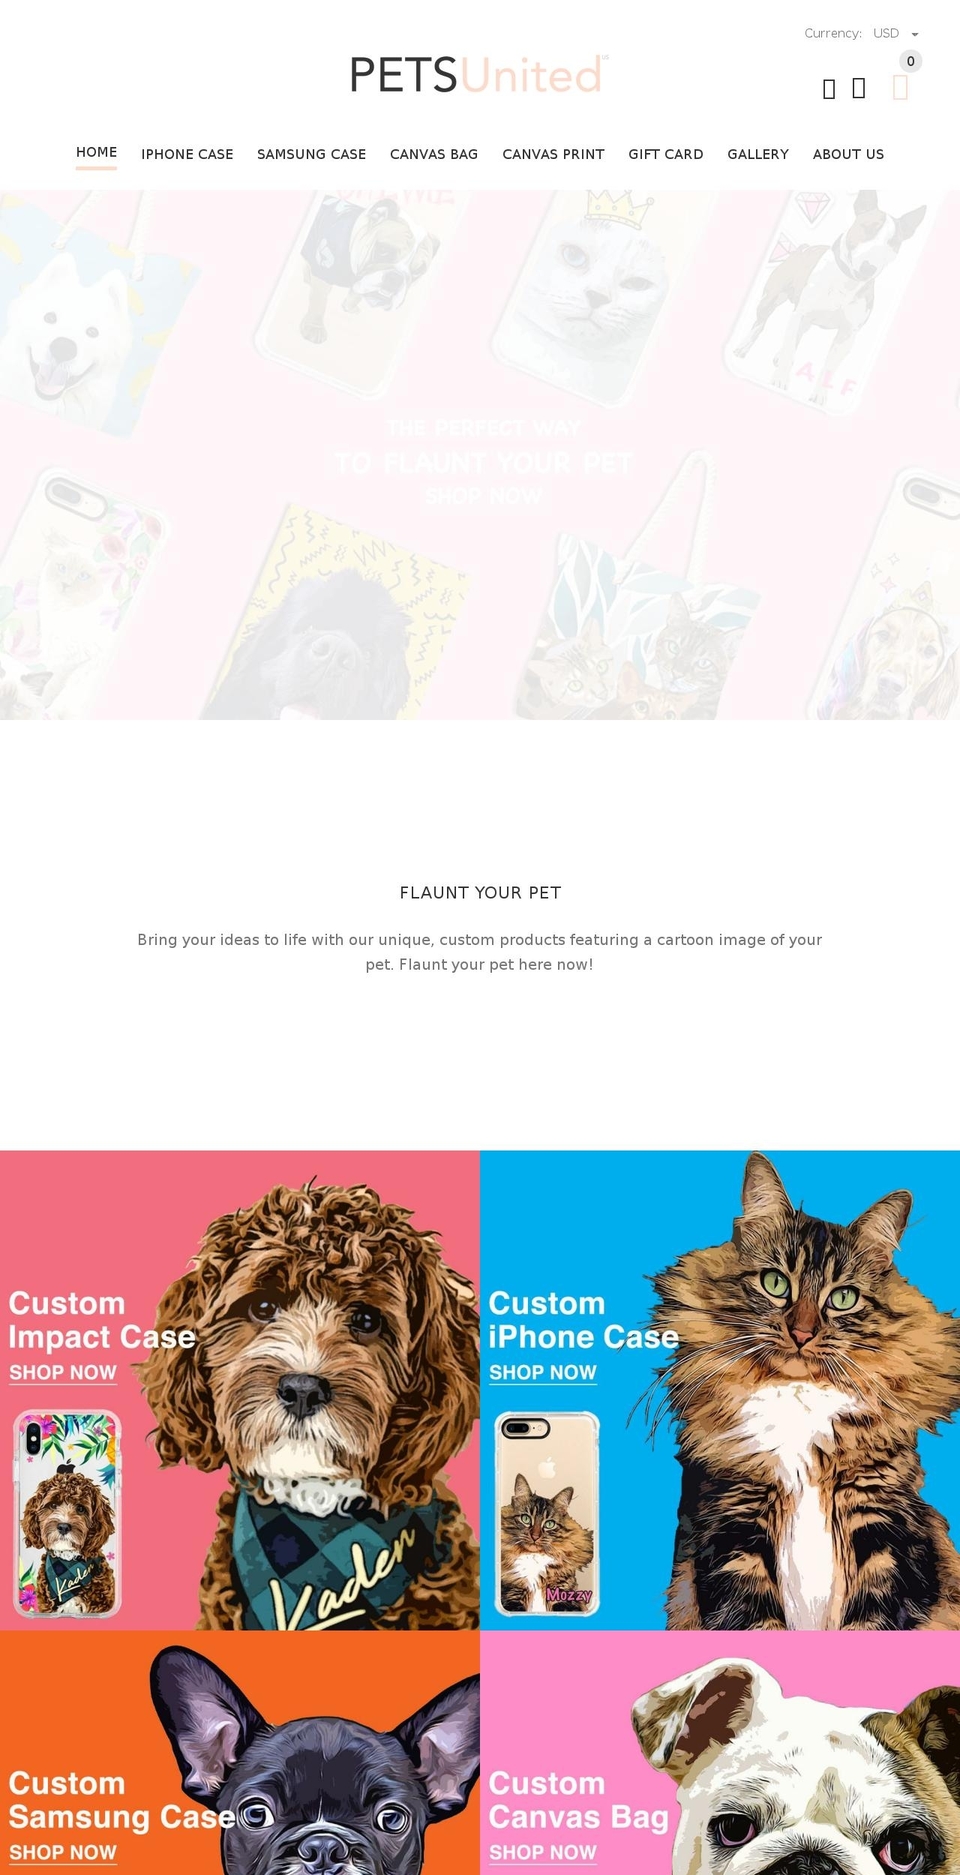 yourstore-v2-1-5 Shopify theme site example petsunited.us